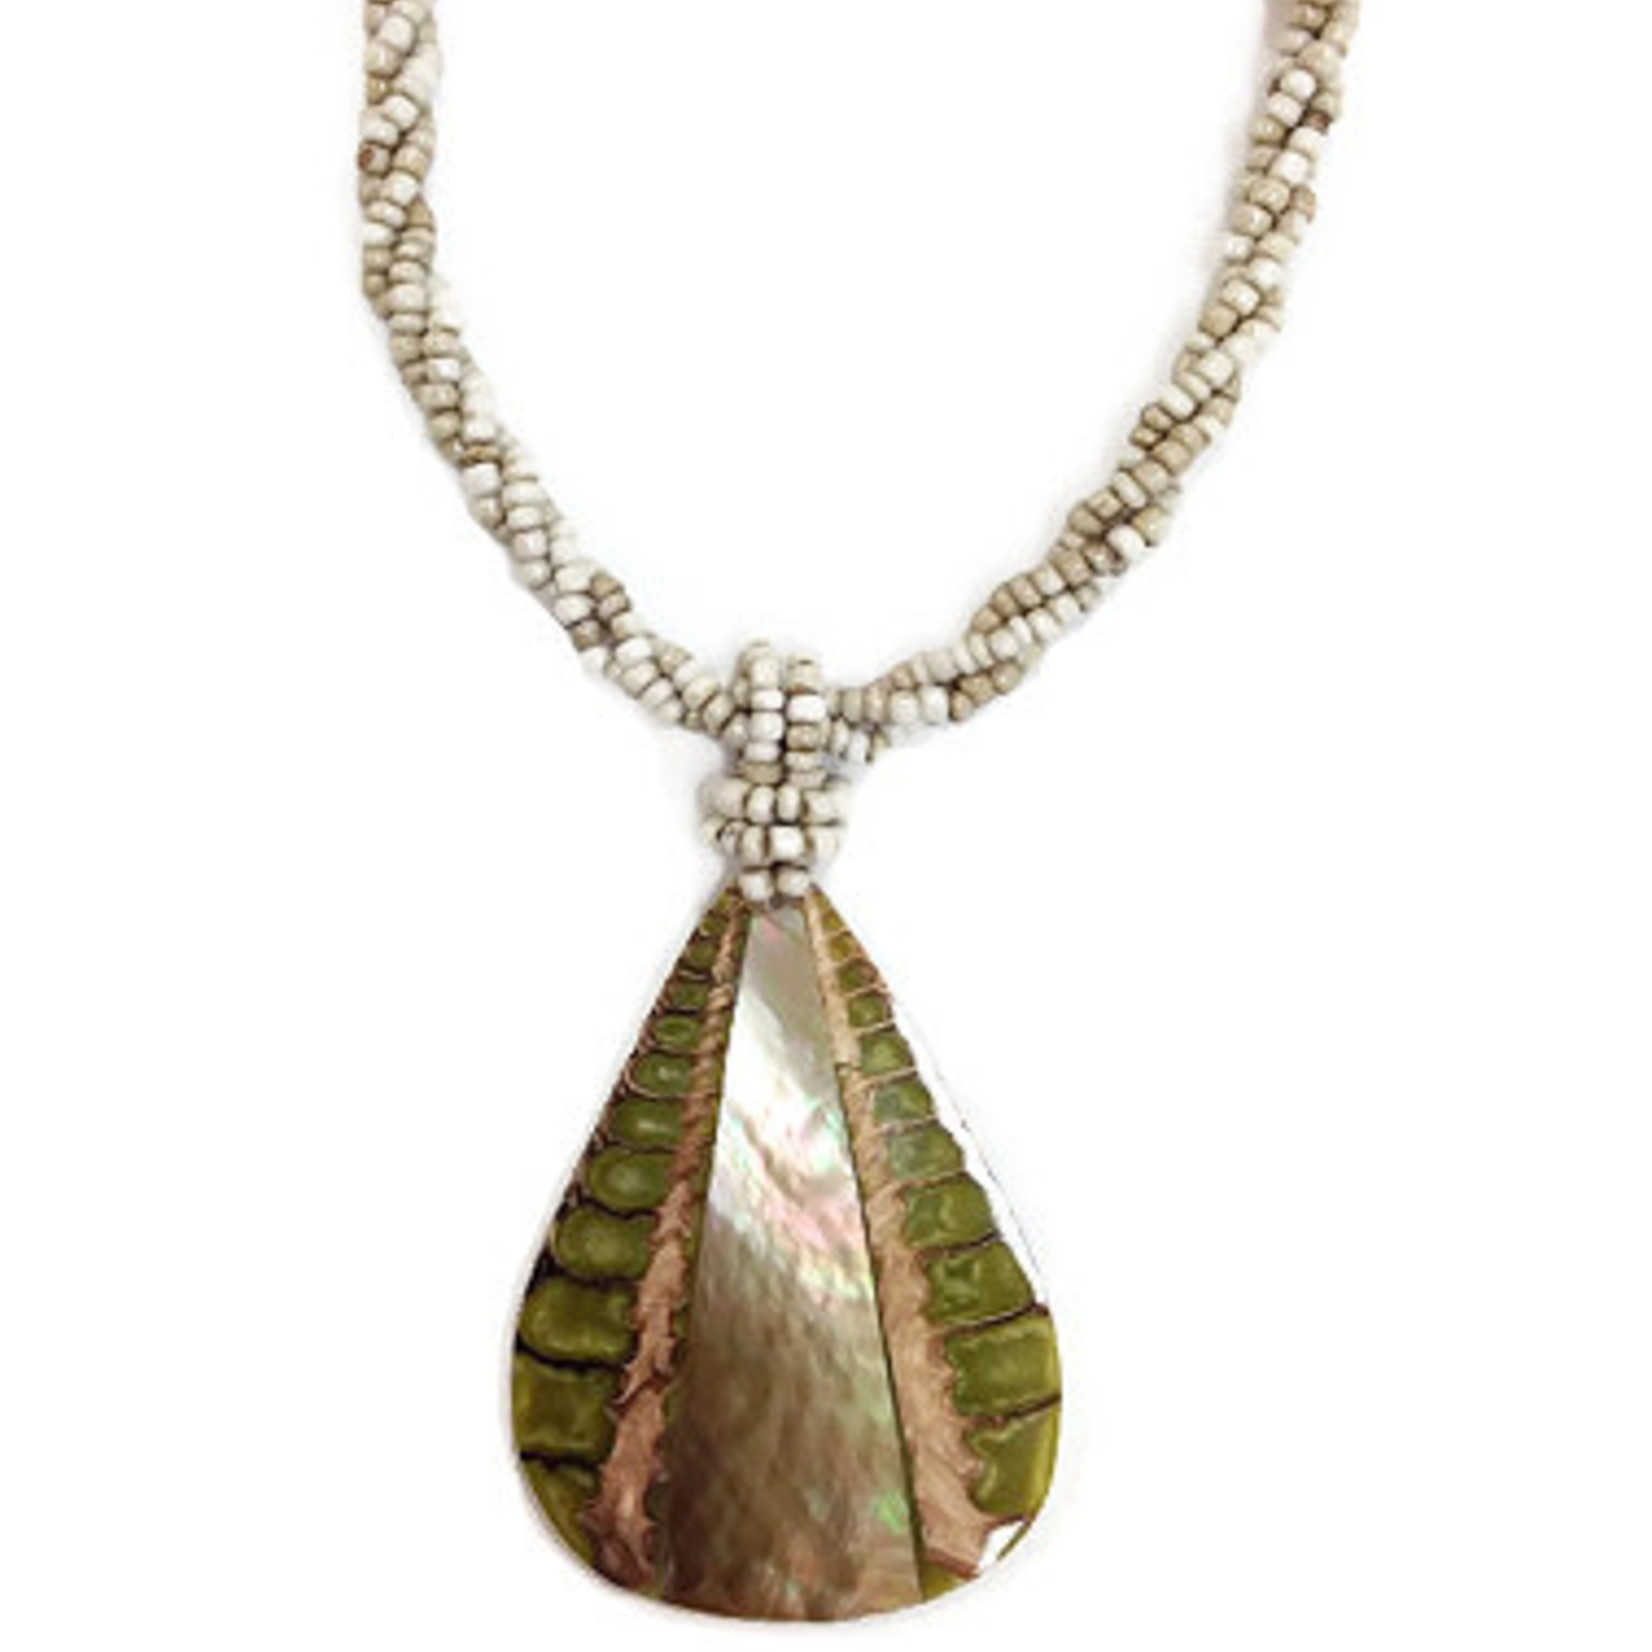 Shell Necklace Gold Sliced Teardrop with Cream Beads - N167